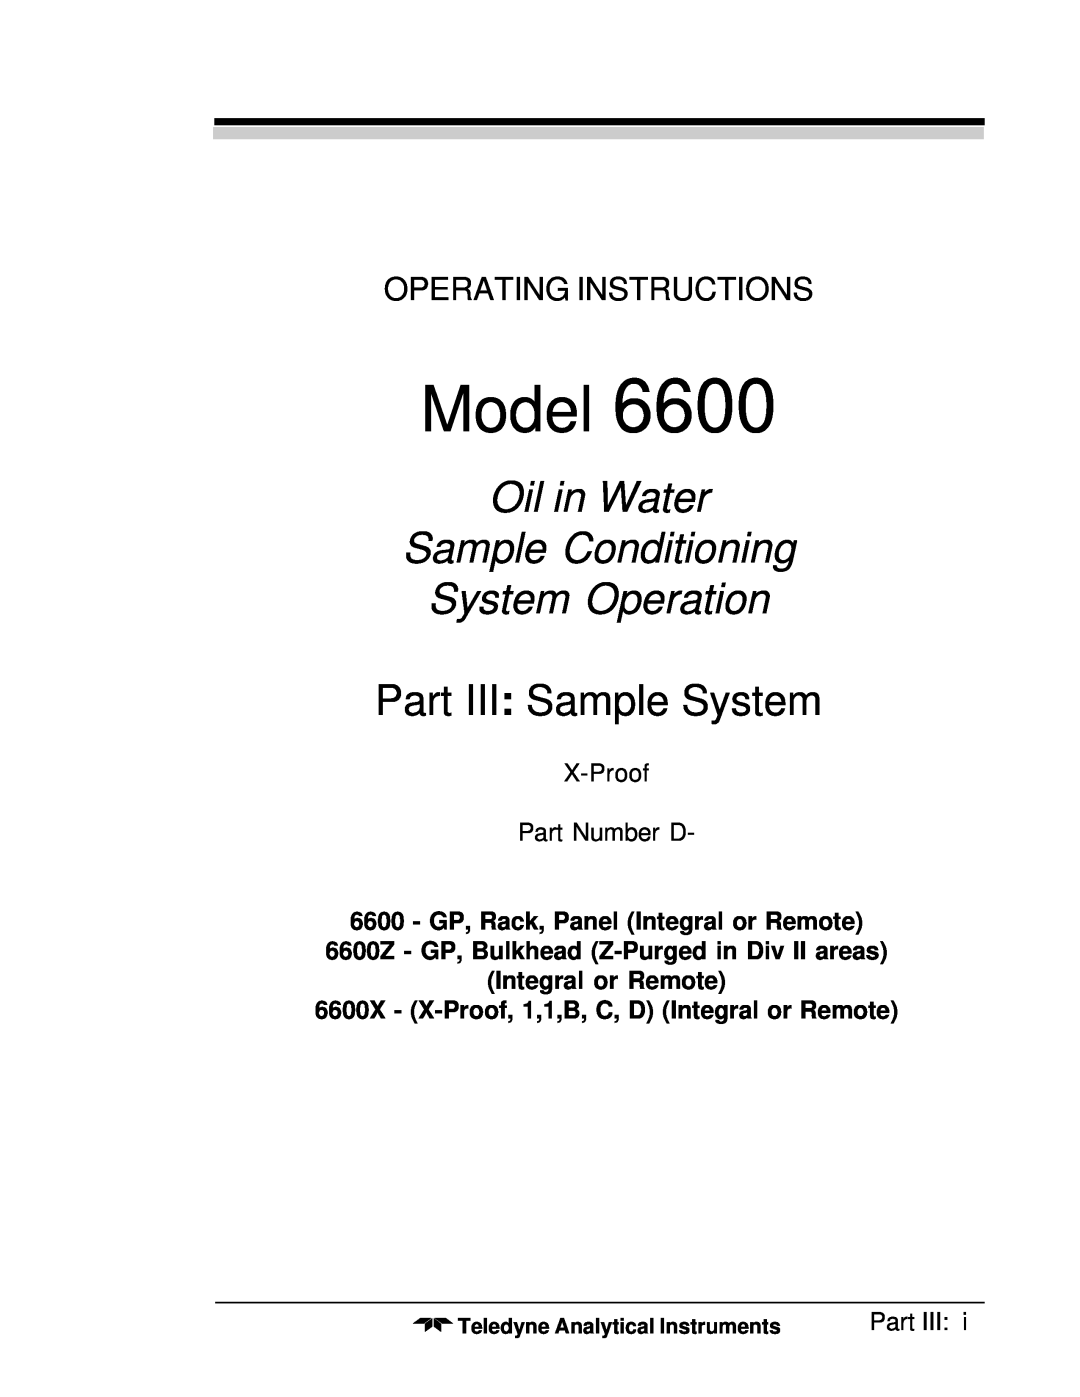 Teledyne 6600 Oil in Water Sample Conditioning System Operation, Part III: Sample System, Model, Operating Instructions 